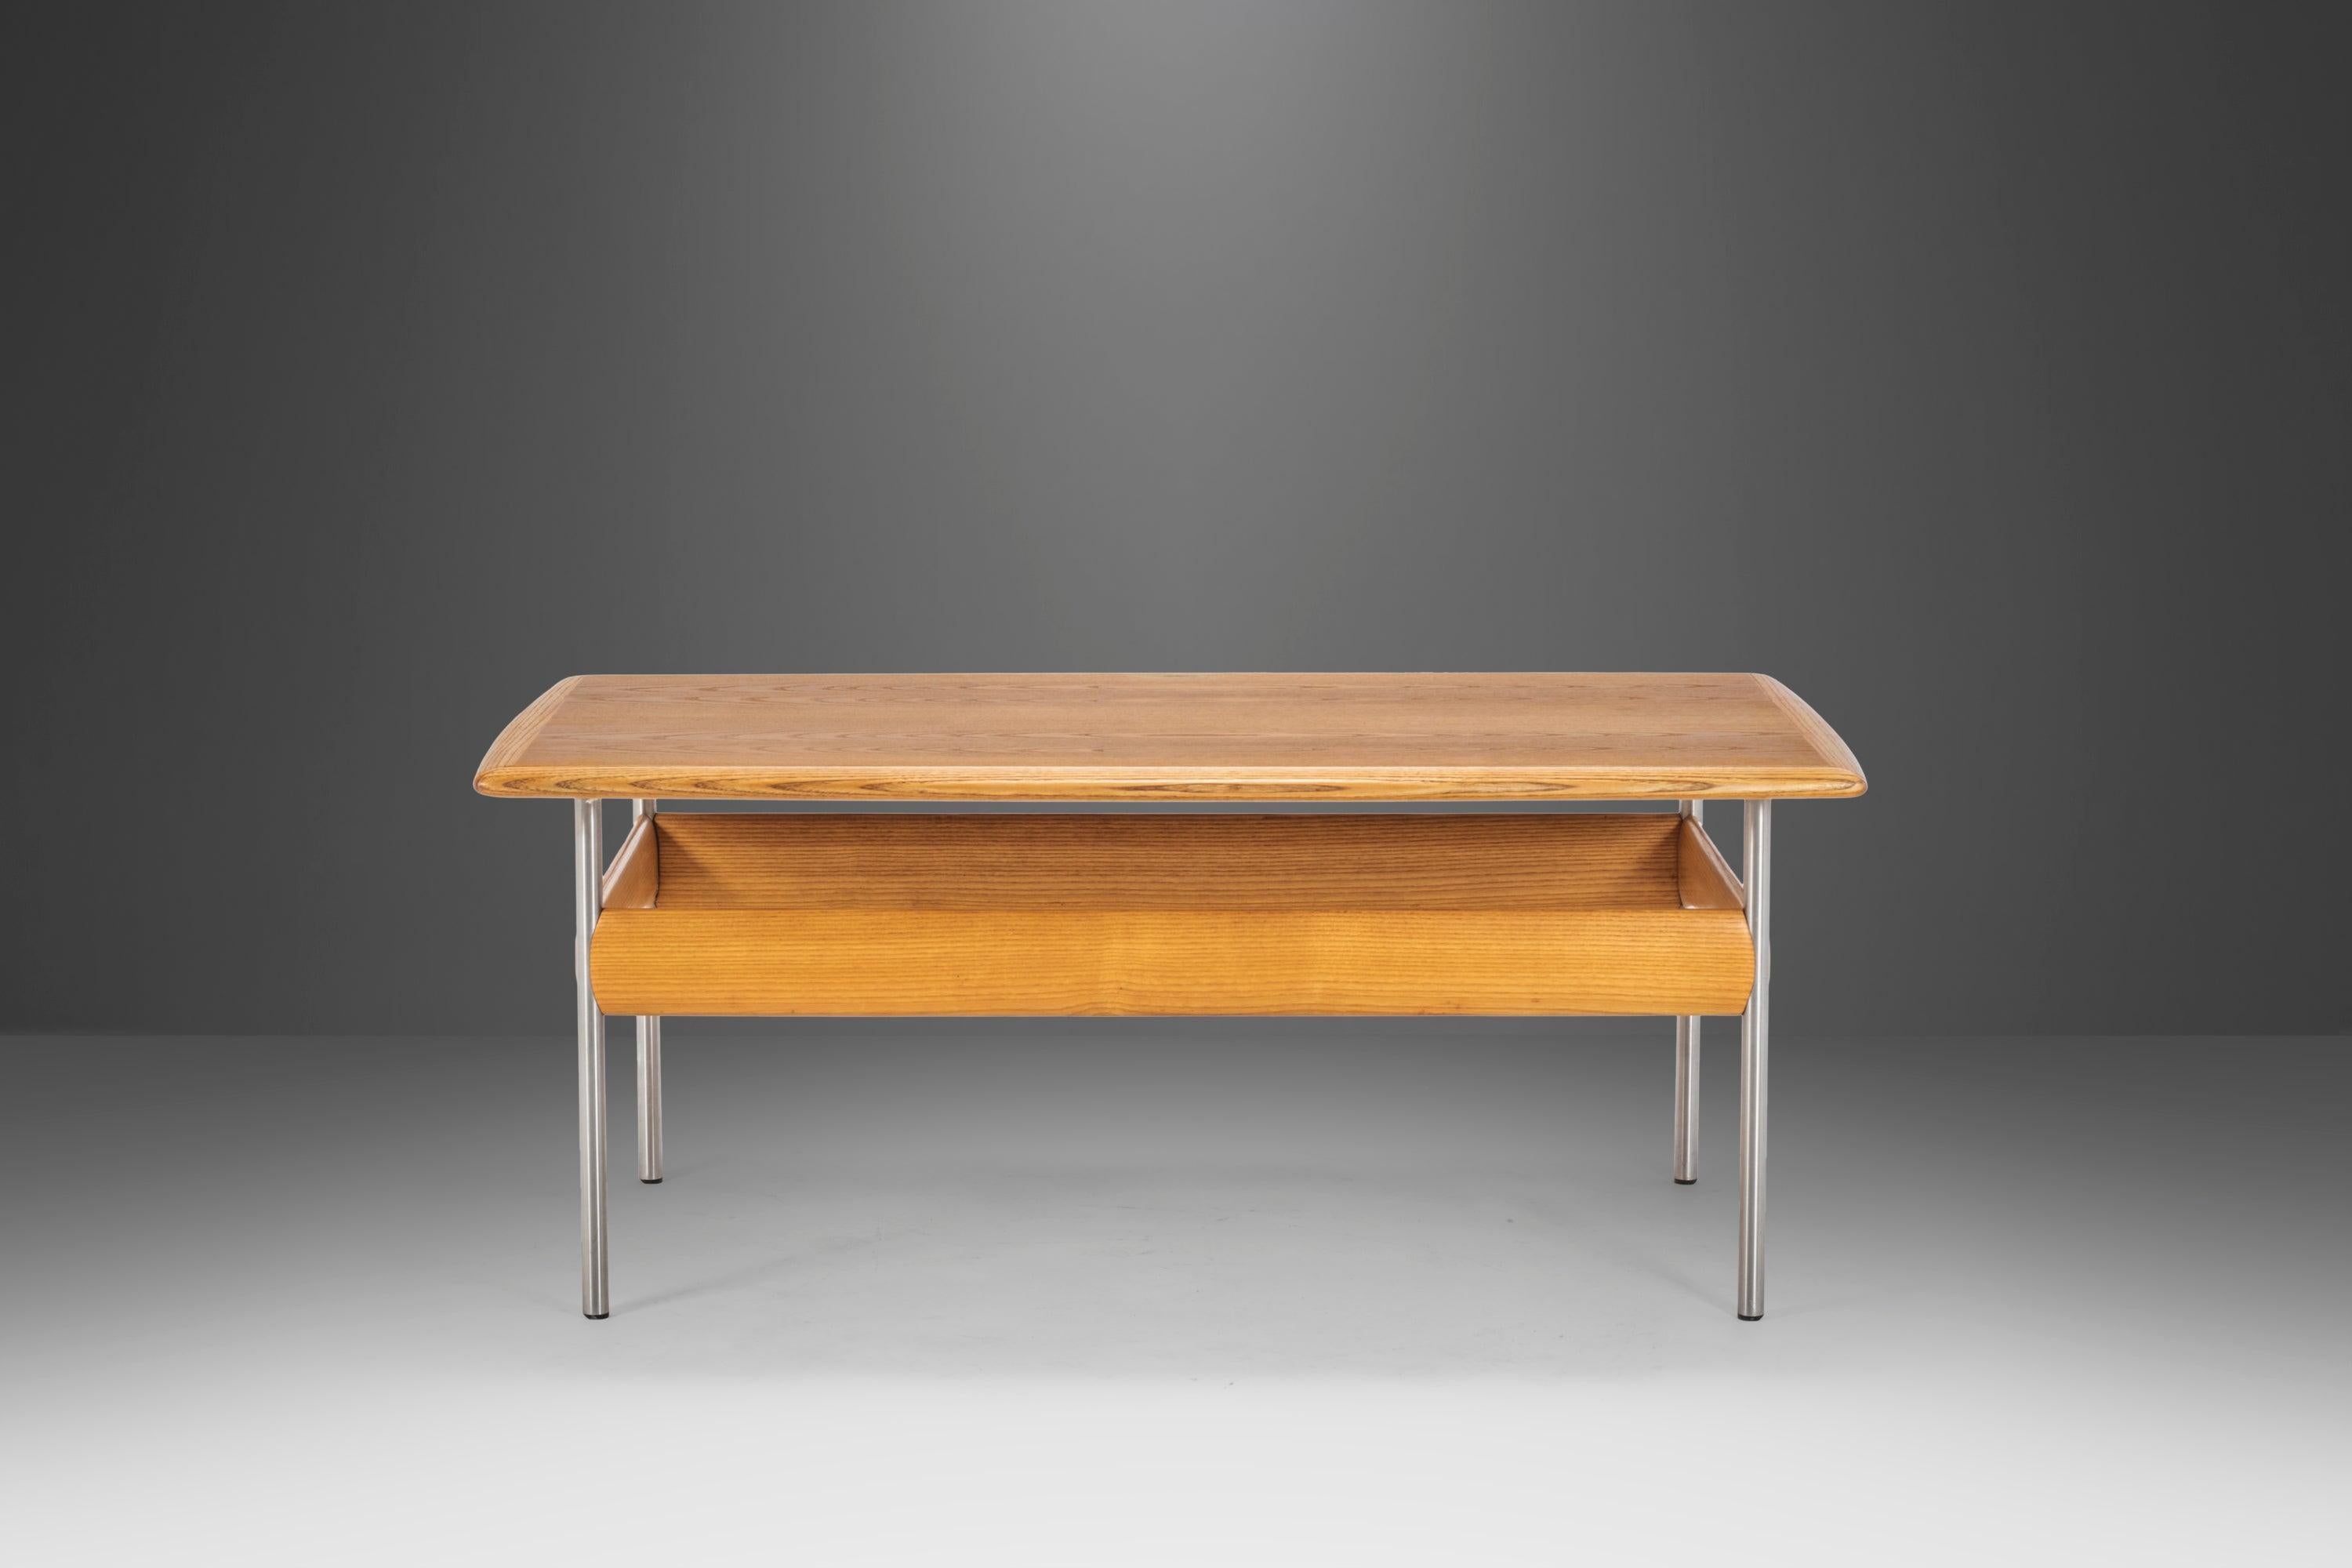 Mid-Century Modern Scandinavian Oak Coffee Table Attributed to Sven Ivar Dysthe for Dokka, c. 1970s For Sale